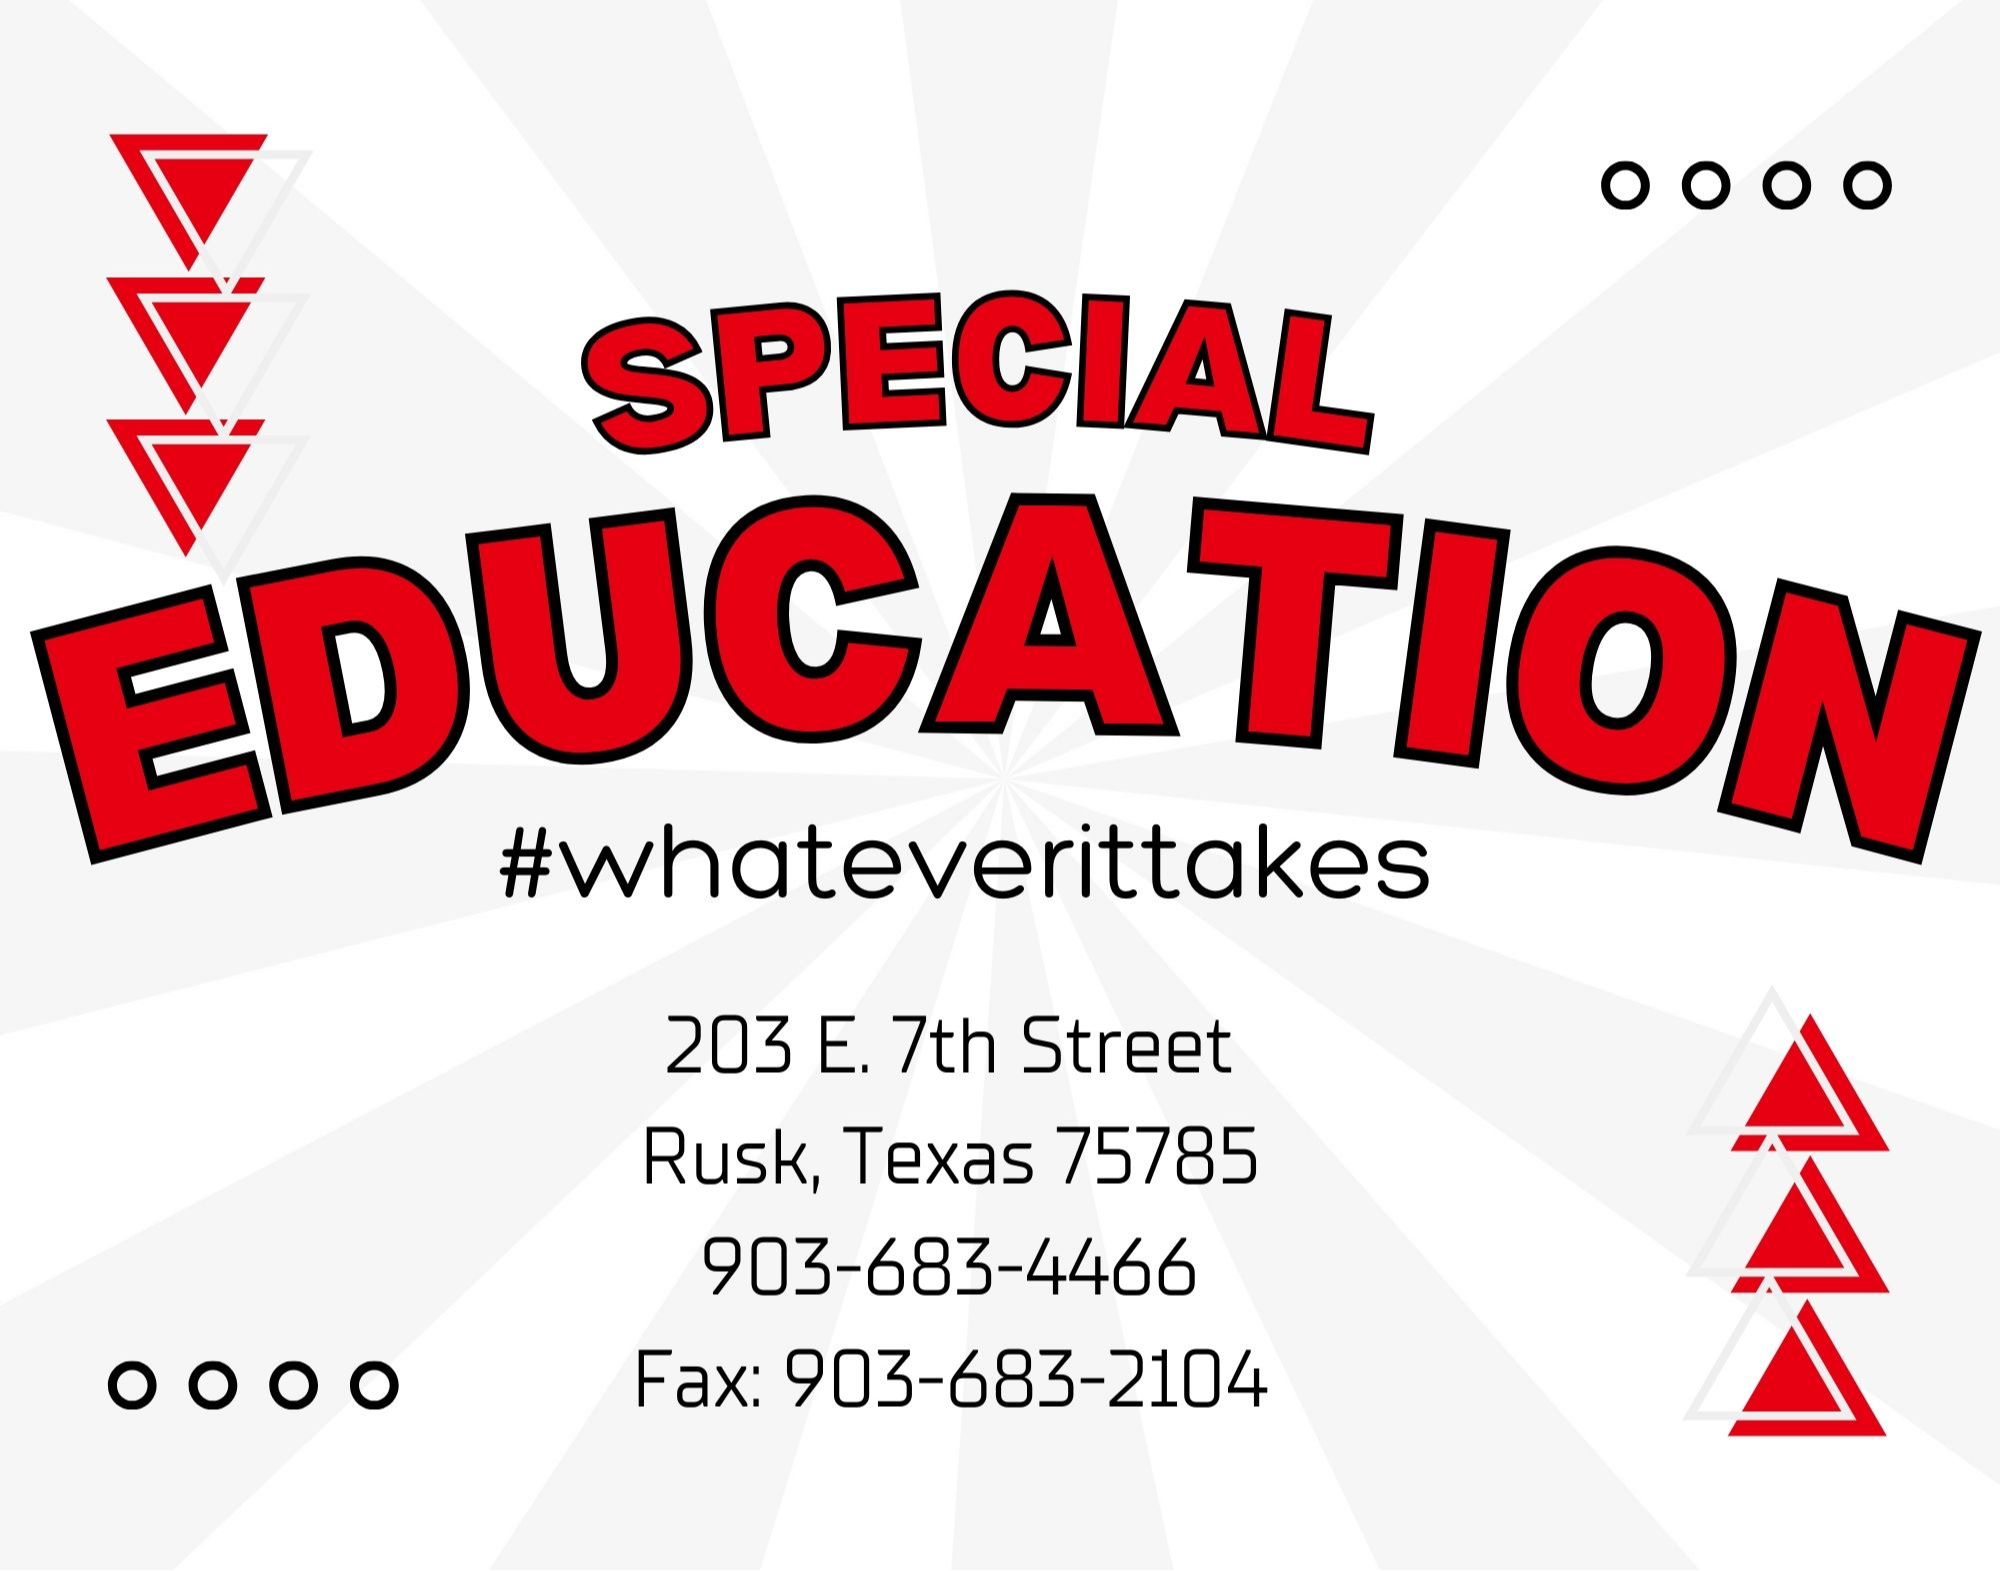 Special Education #whateverittakes 203 E. 7th Street Rusk, Texas 75785 903-683-4466 Fax:  903-683-2104